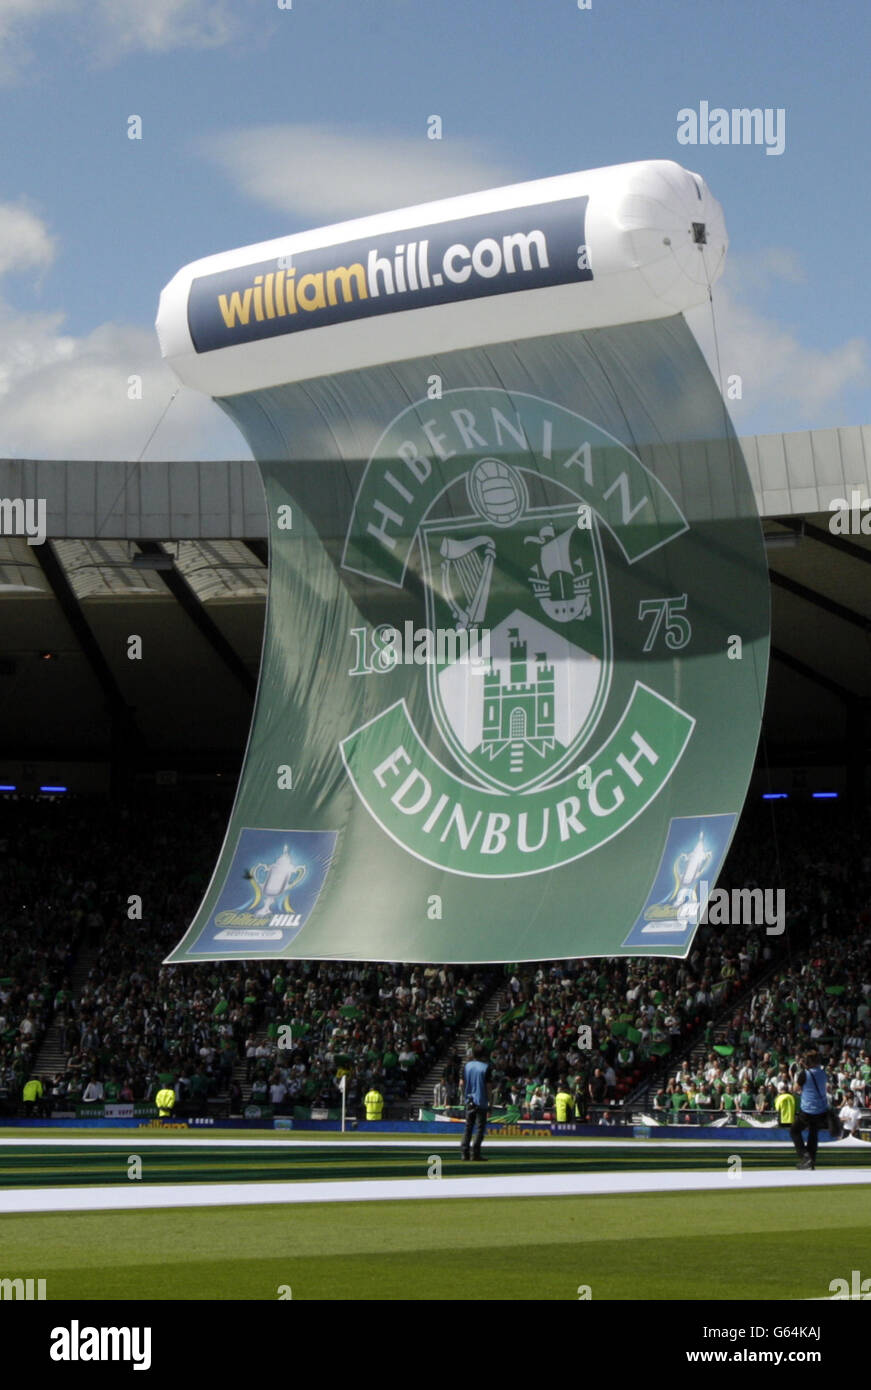 William Hill banners during the Scottish Cup Final at Hampden Park, Glasgow. PRESS ASSOCIATION Photo. Picture date: Sunday May 26, 2013. See PA story SOCCER Scottish Cup. Photo credit should read: Danny Lawson/PA Wire. . Stock Photo